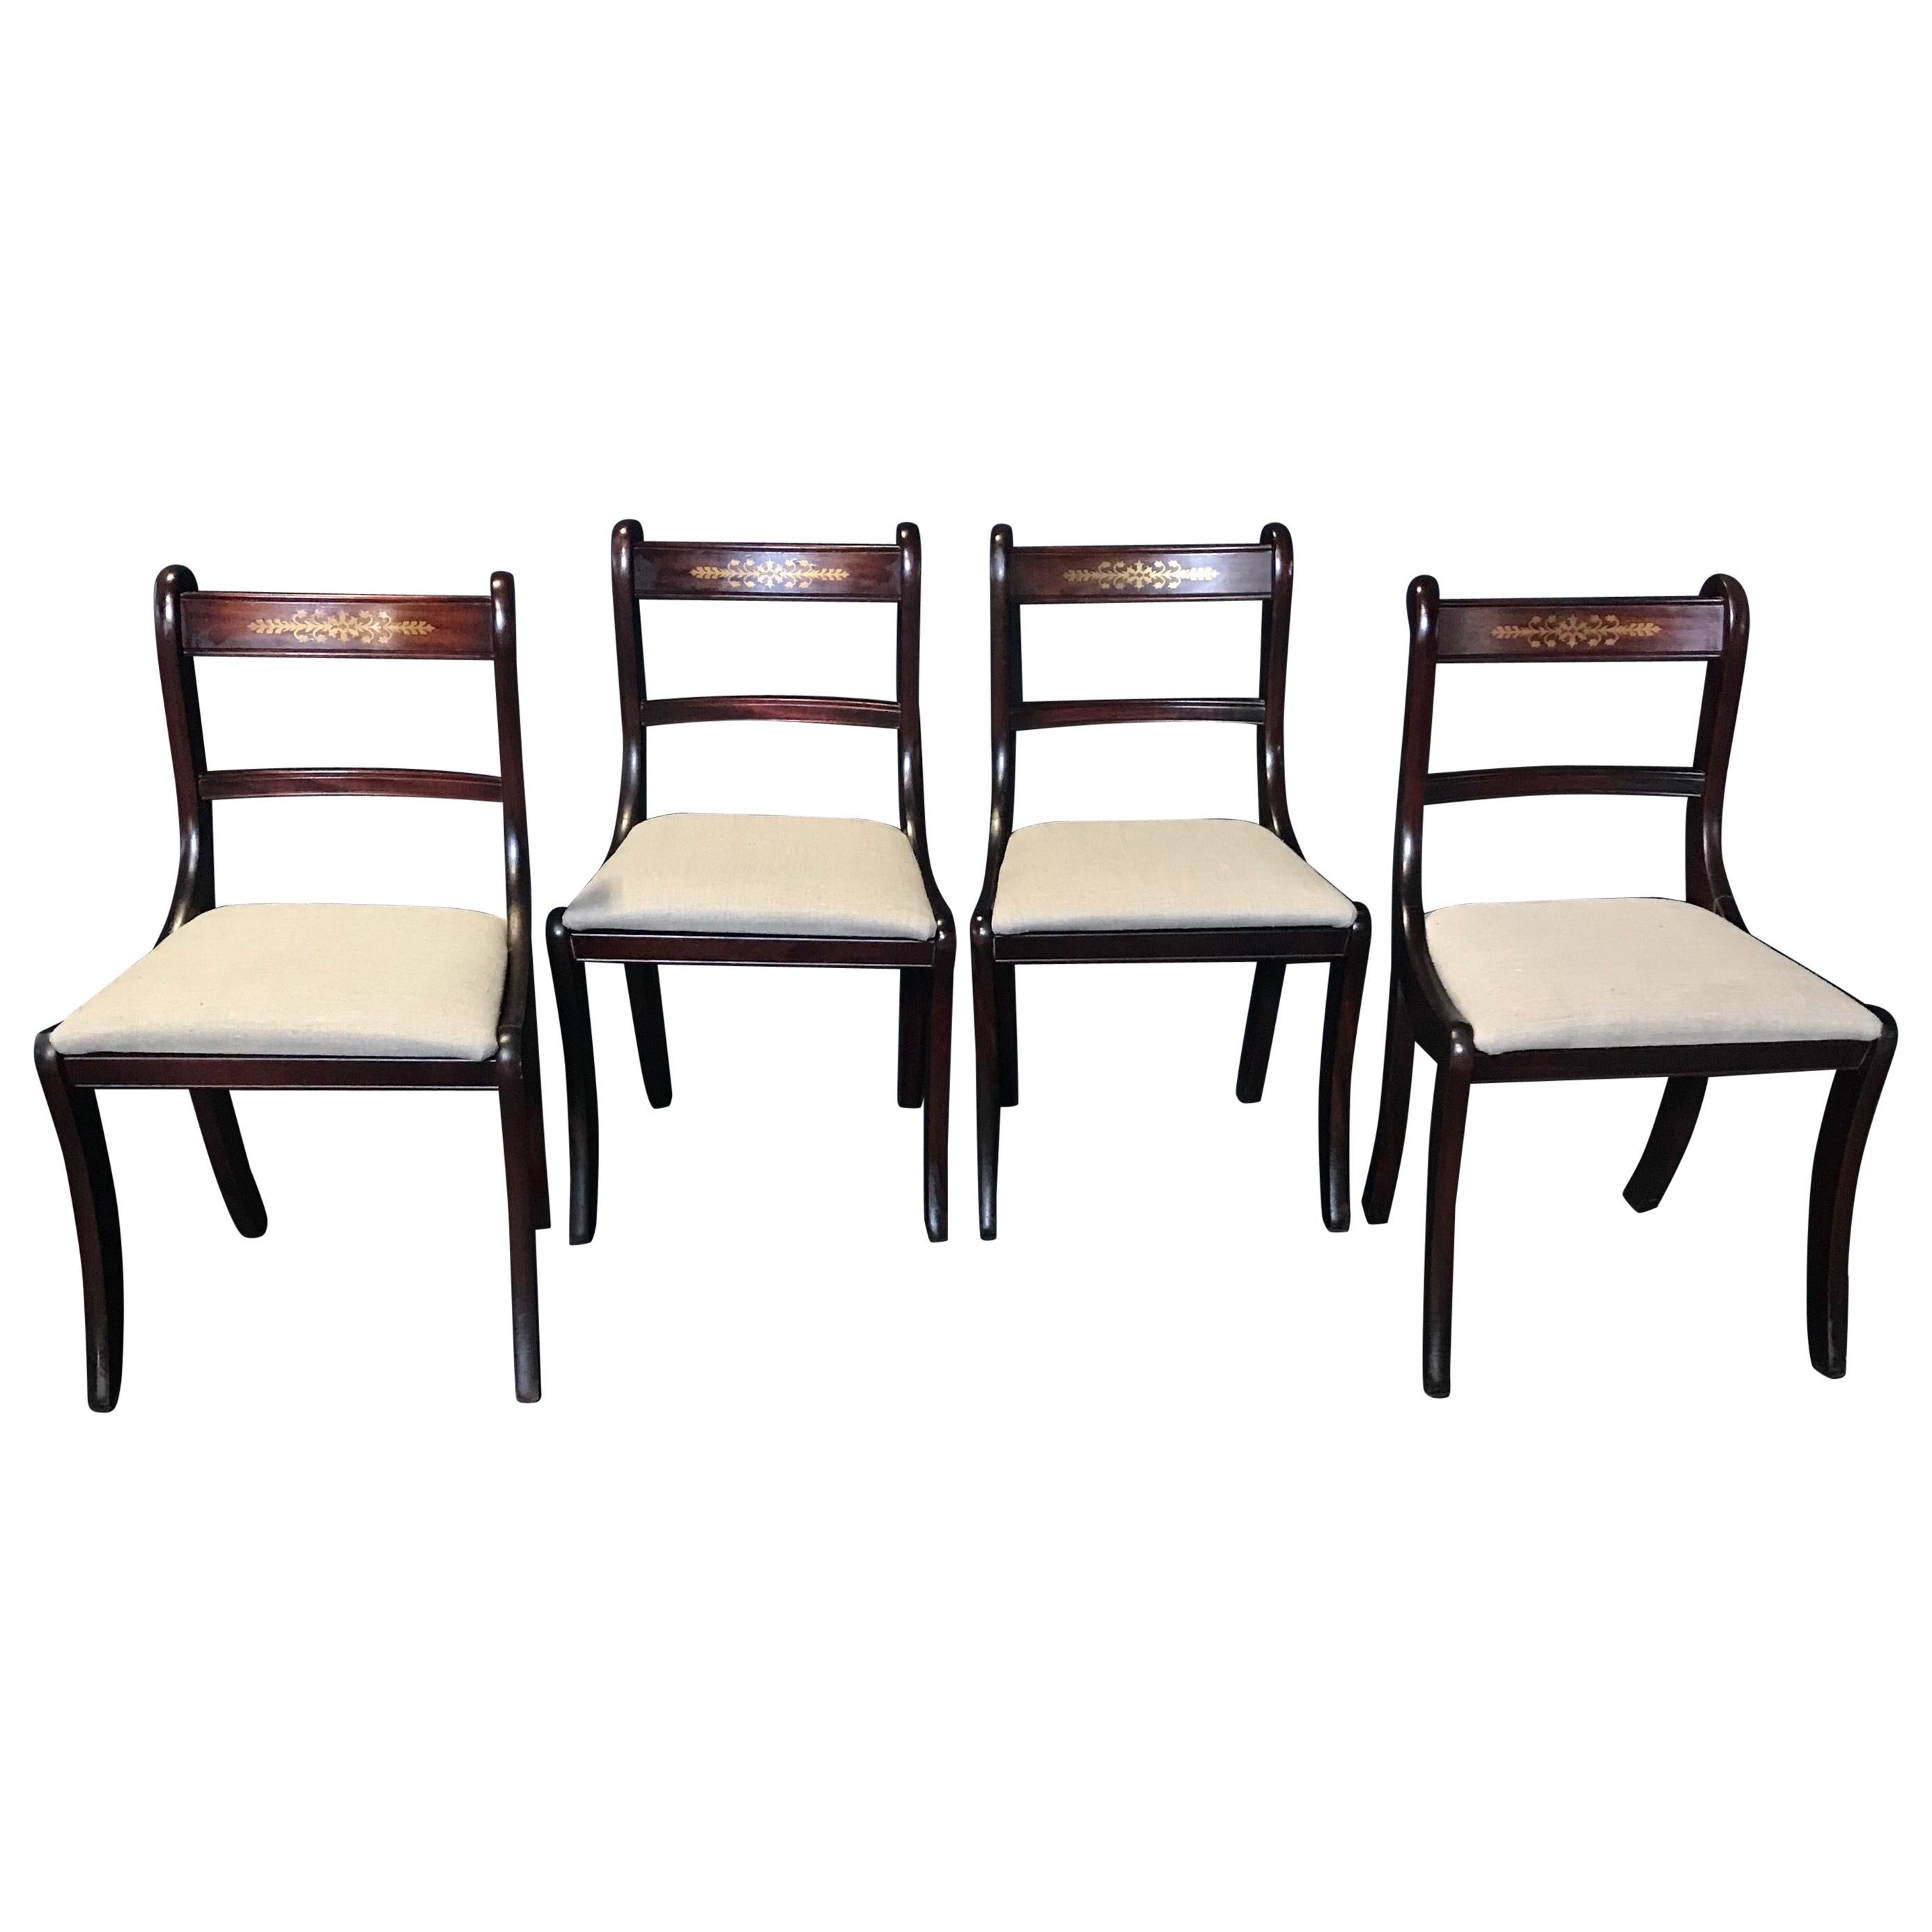 Set of 4 English Regency Mahogany and Brass Inlaid Dining Chairs